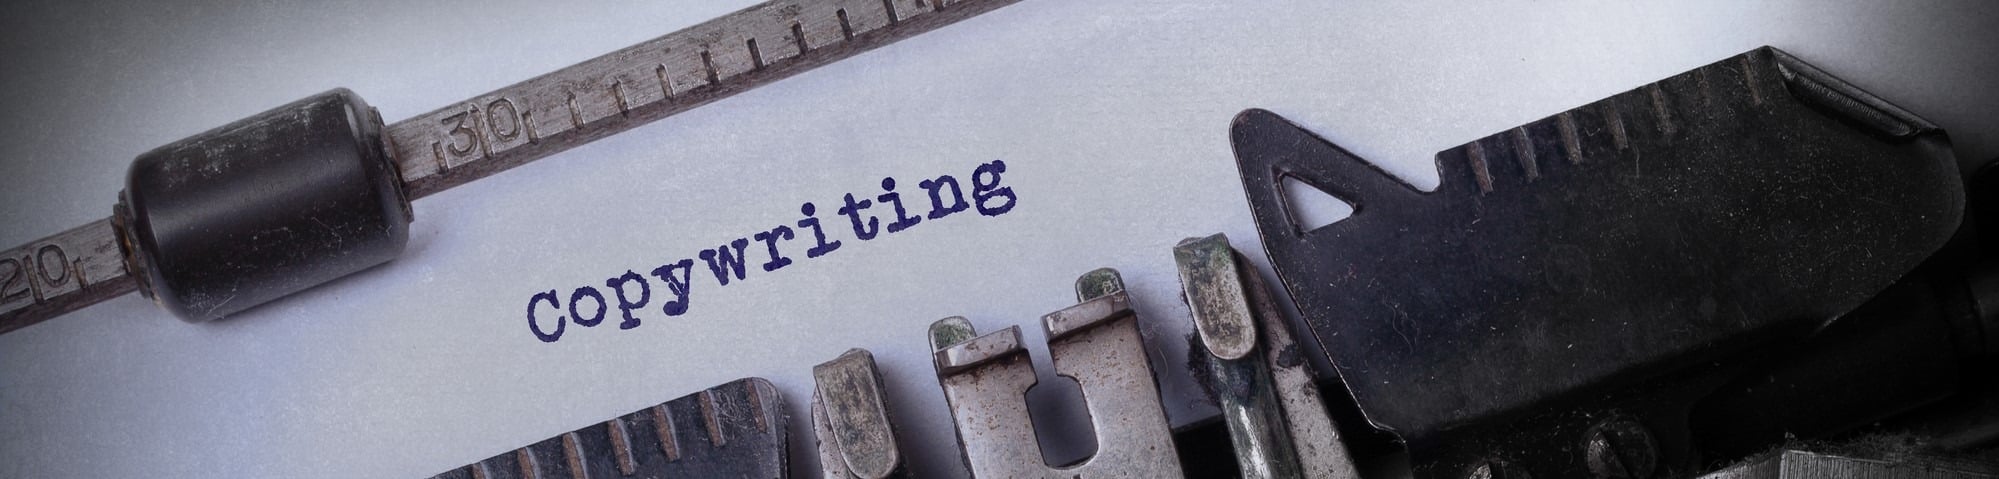 The 10 Best Copywriting Resources For Budding Copywriters